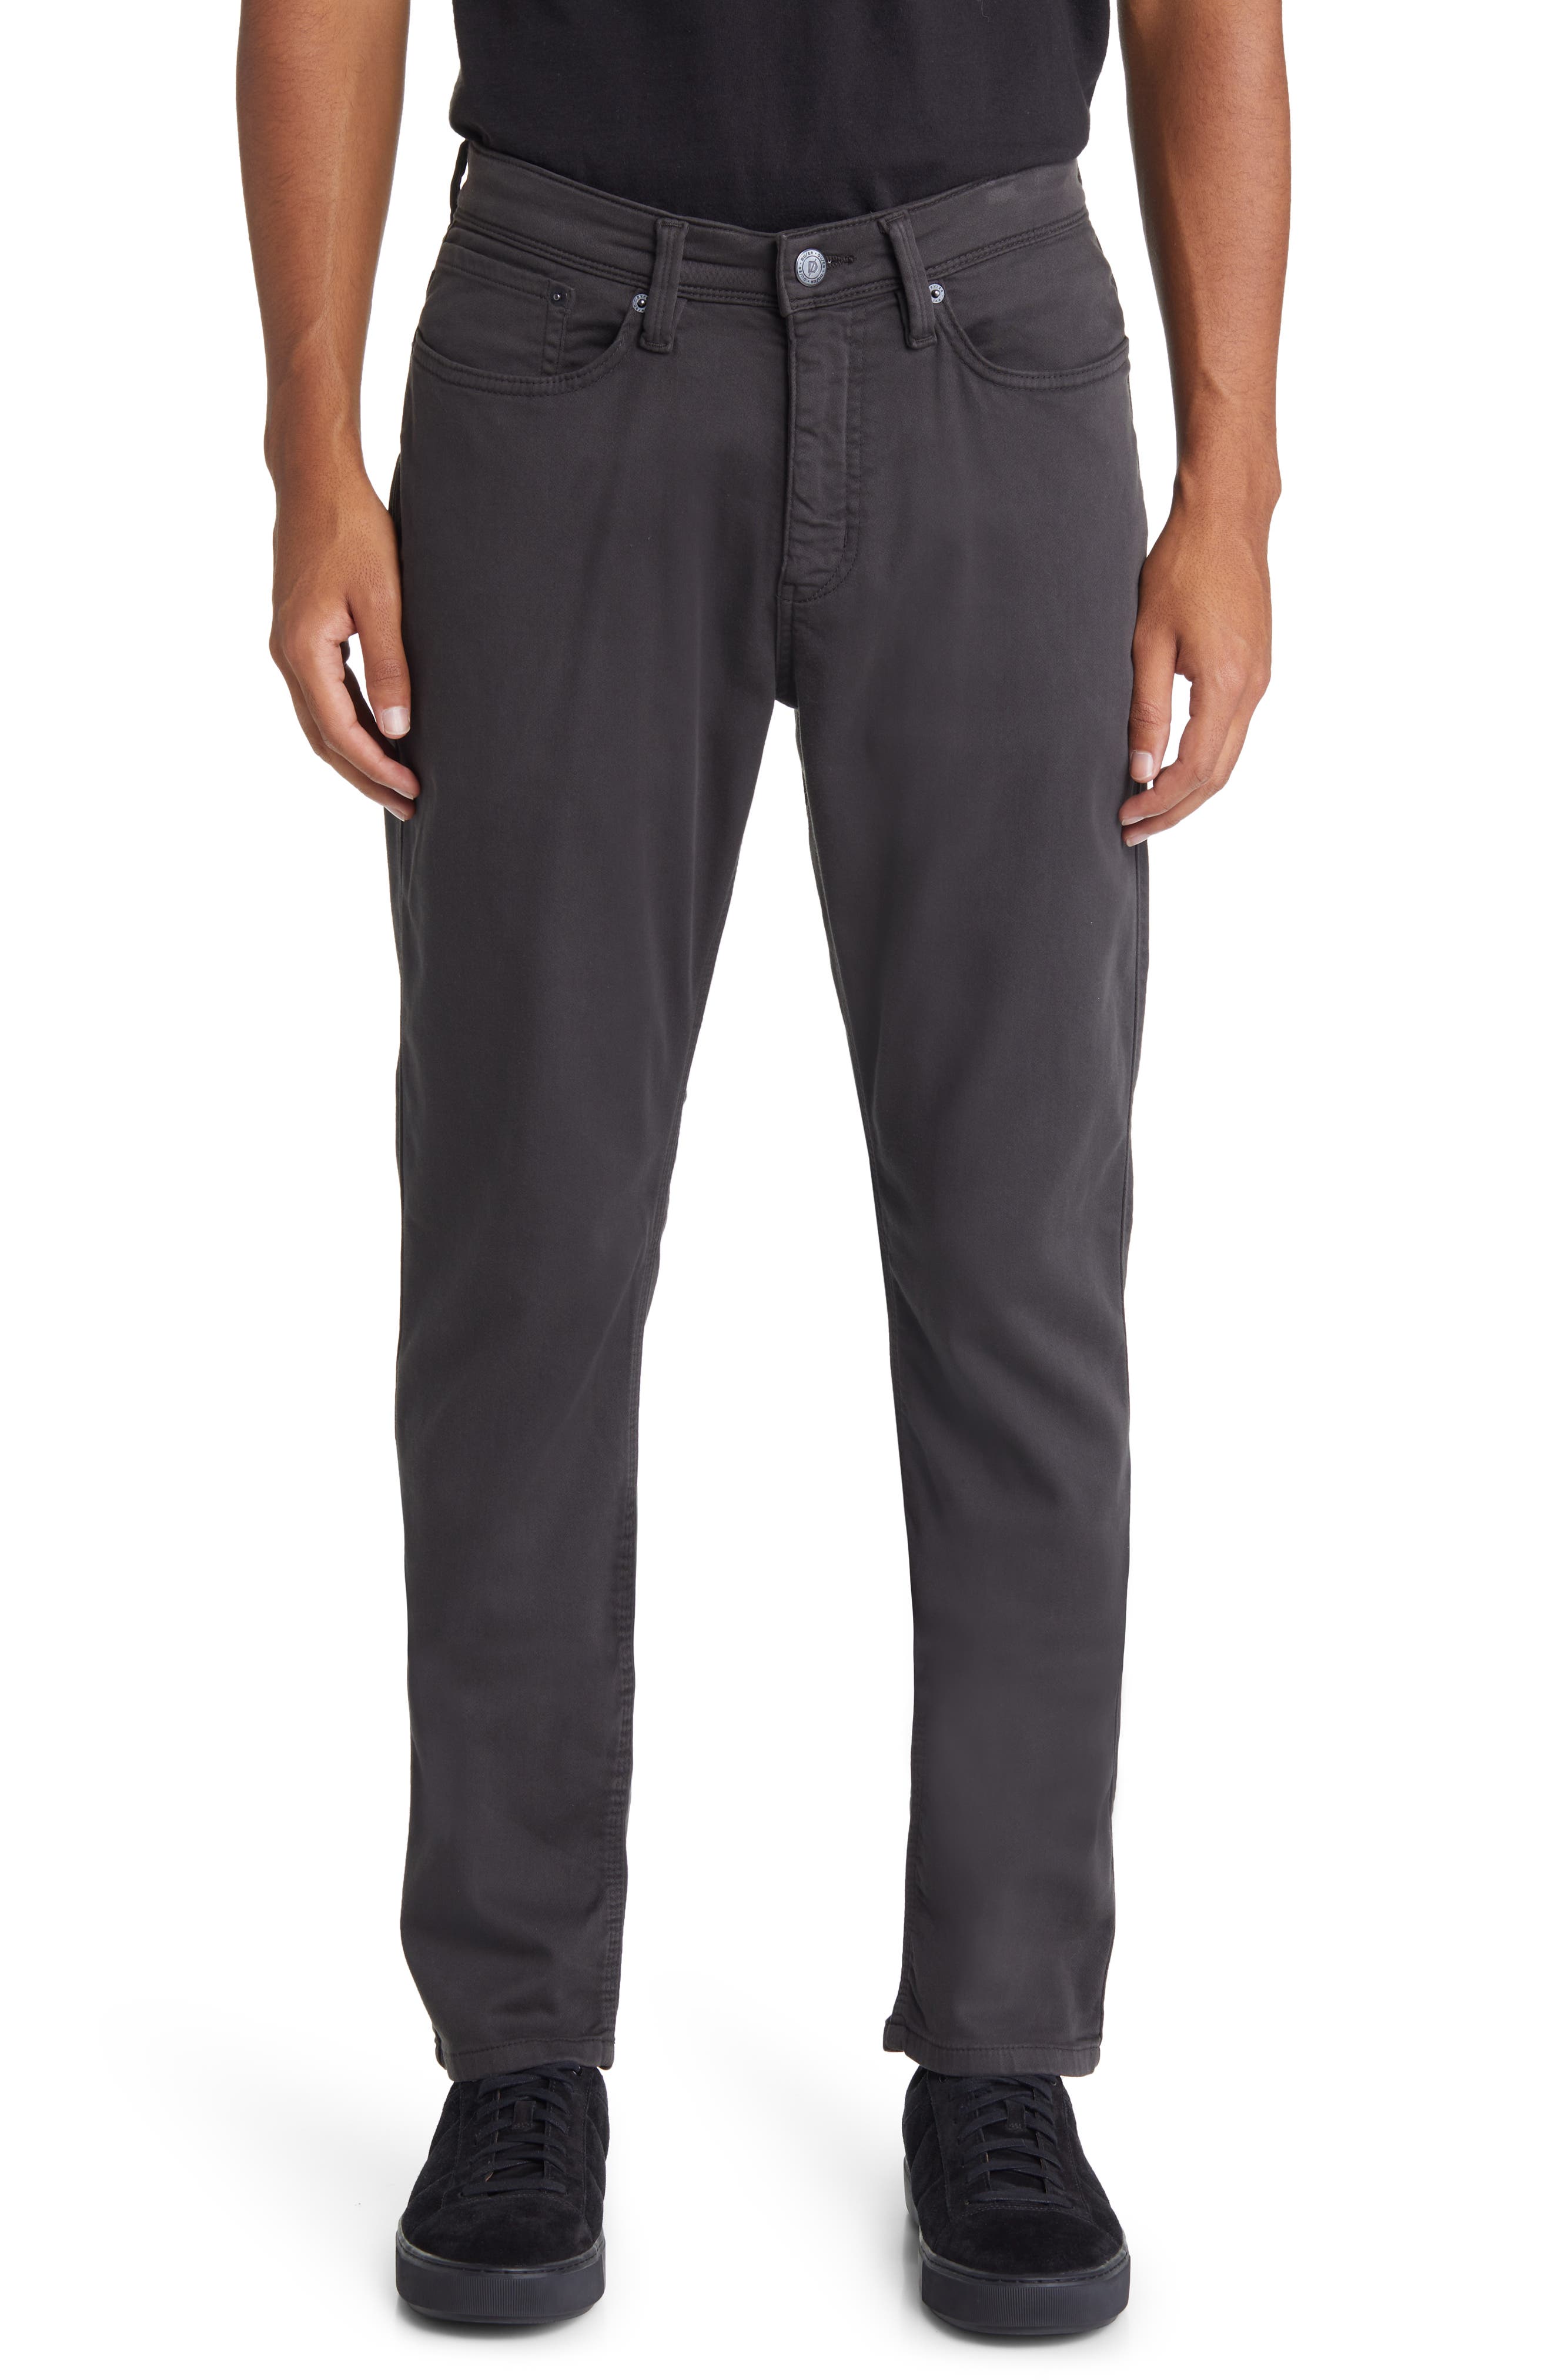 DUER No Sweat Relaxed Fit Pant - Men's 